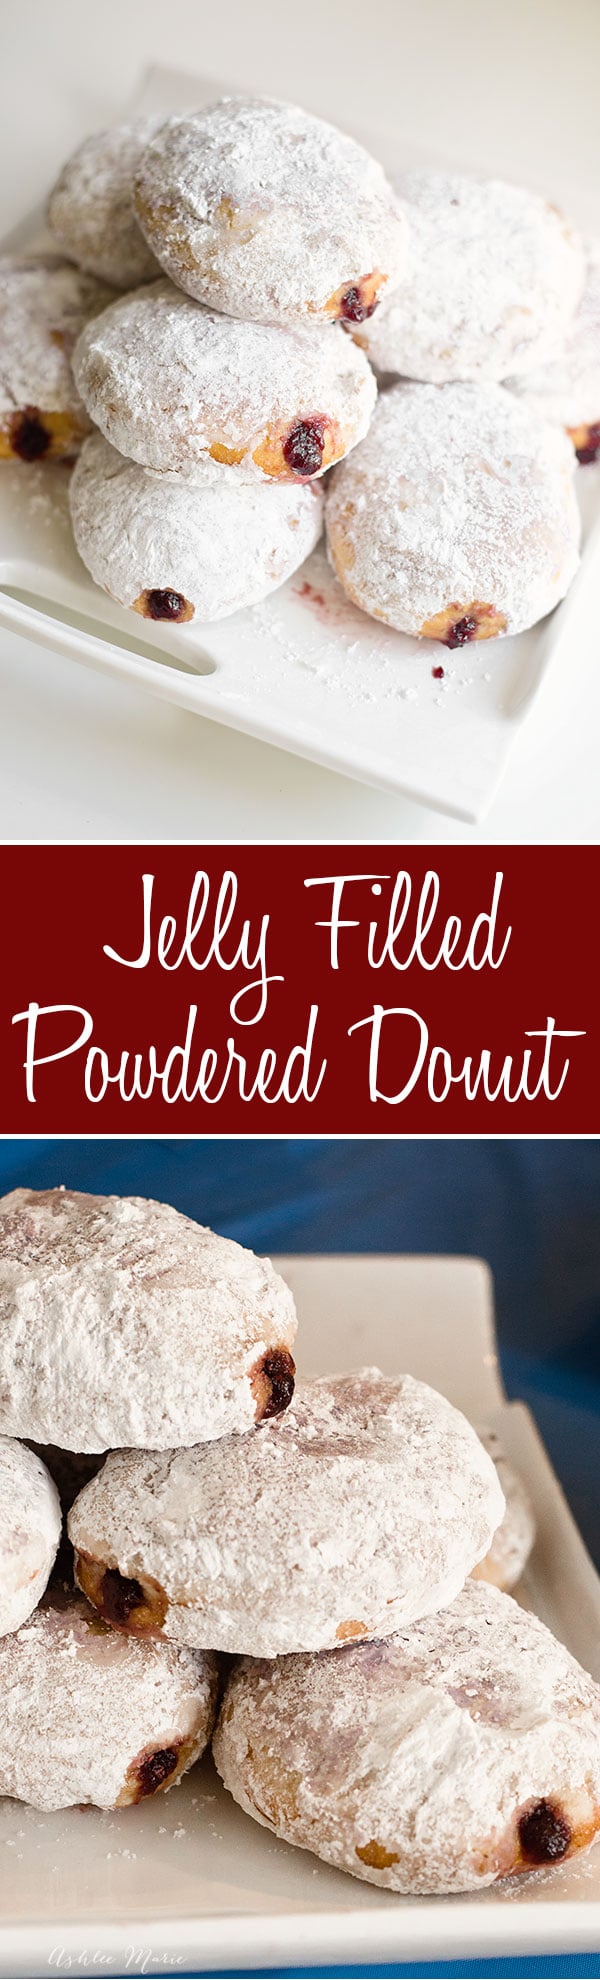 Easy to make and delicious, these homemade jelly filled powedered donuts are always a huge hit